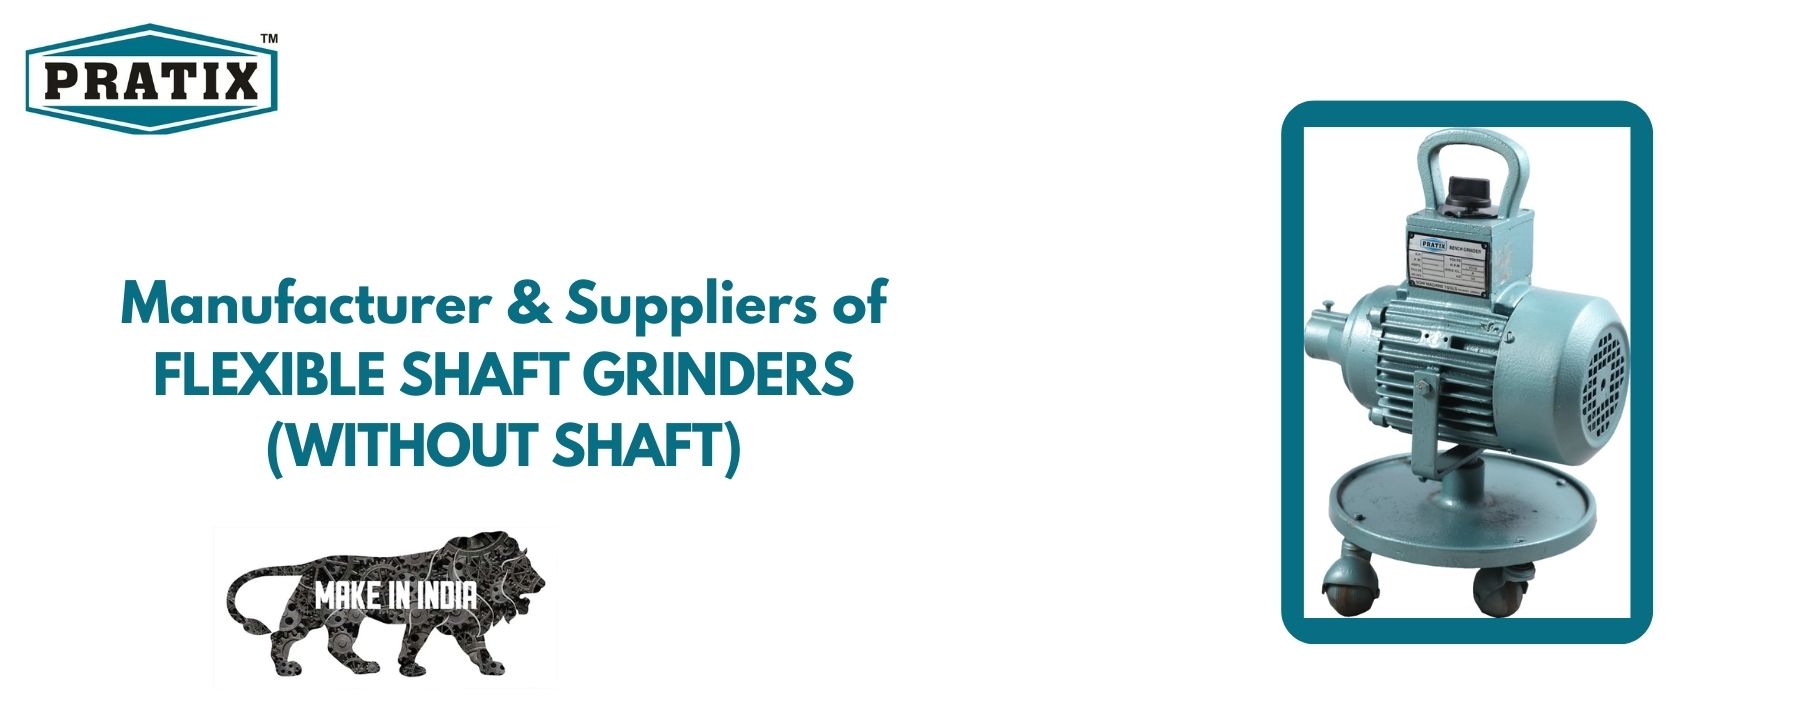 FLEXIBLE SHAFT GRINDERS (WITHOUT SHAFT)